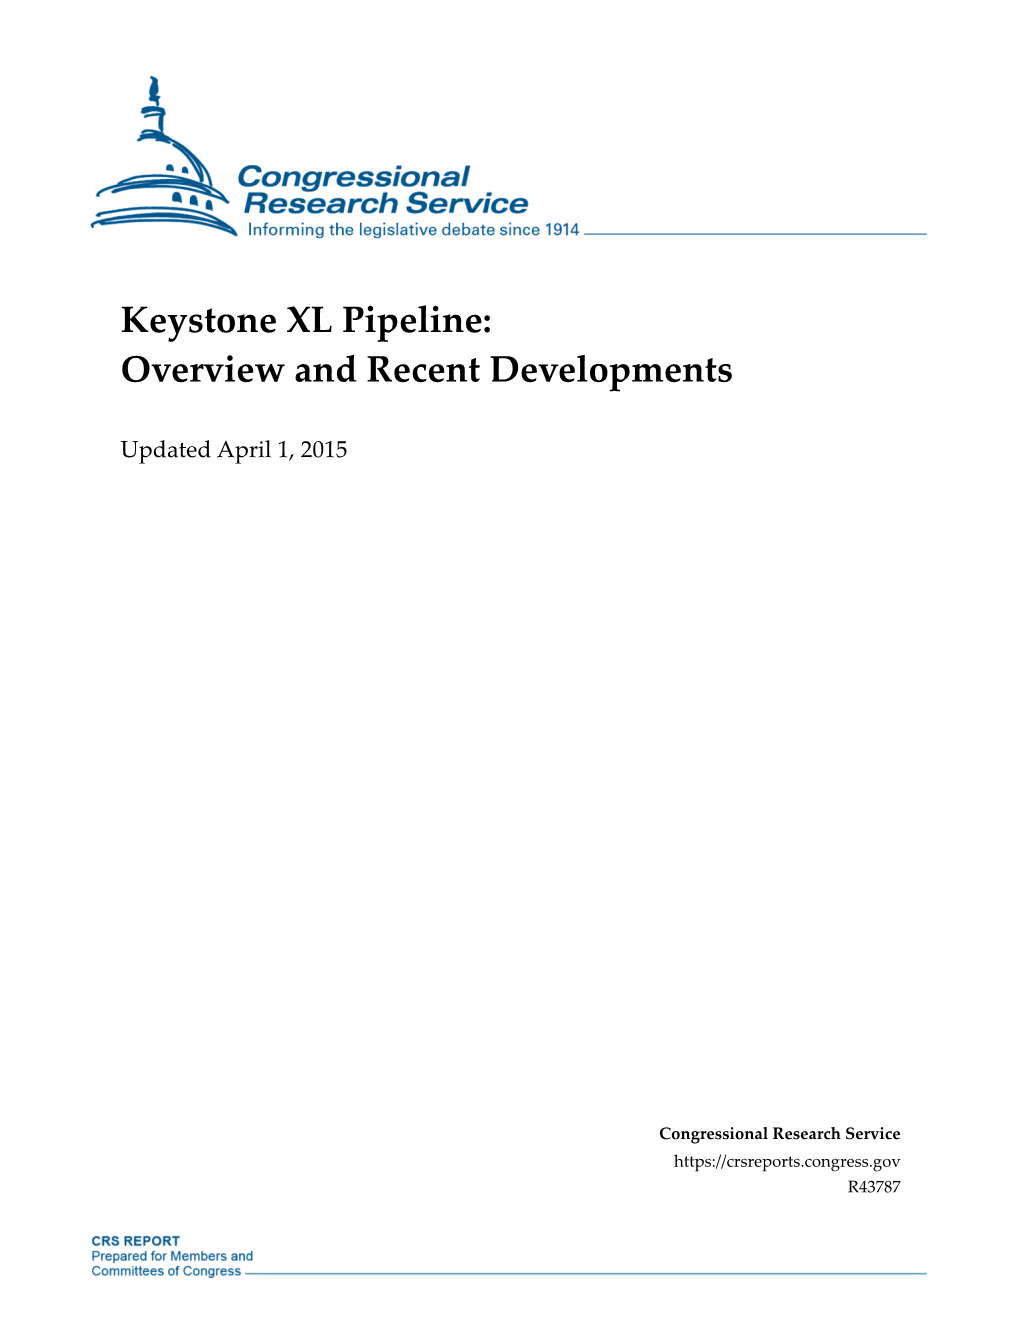 Keystone XL Pipeline: Overview and Recent Developments